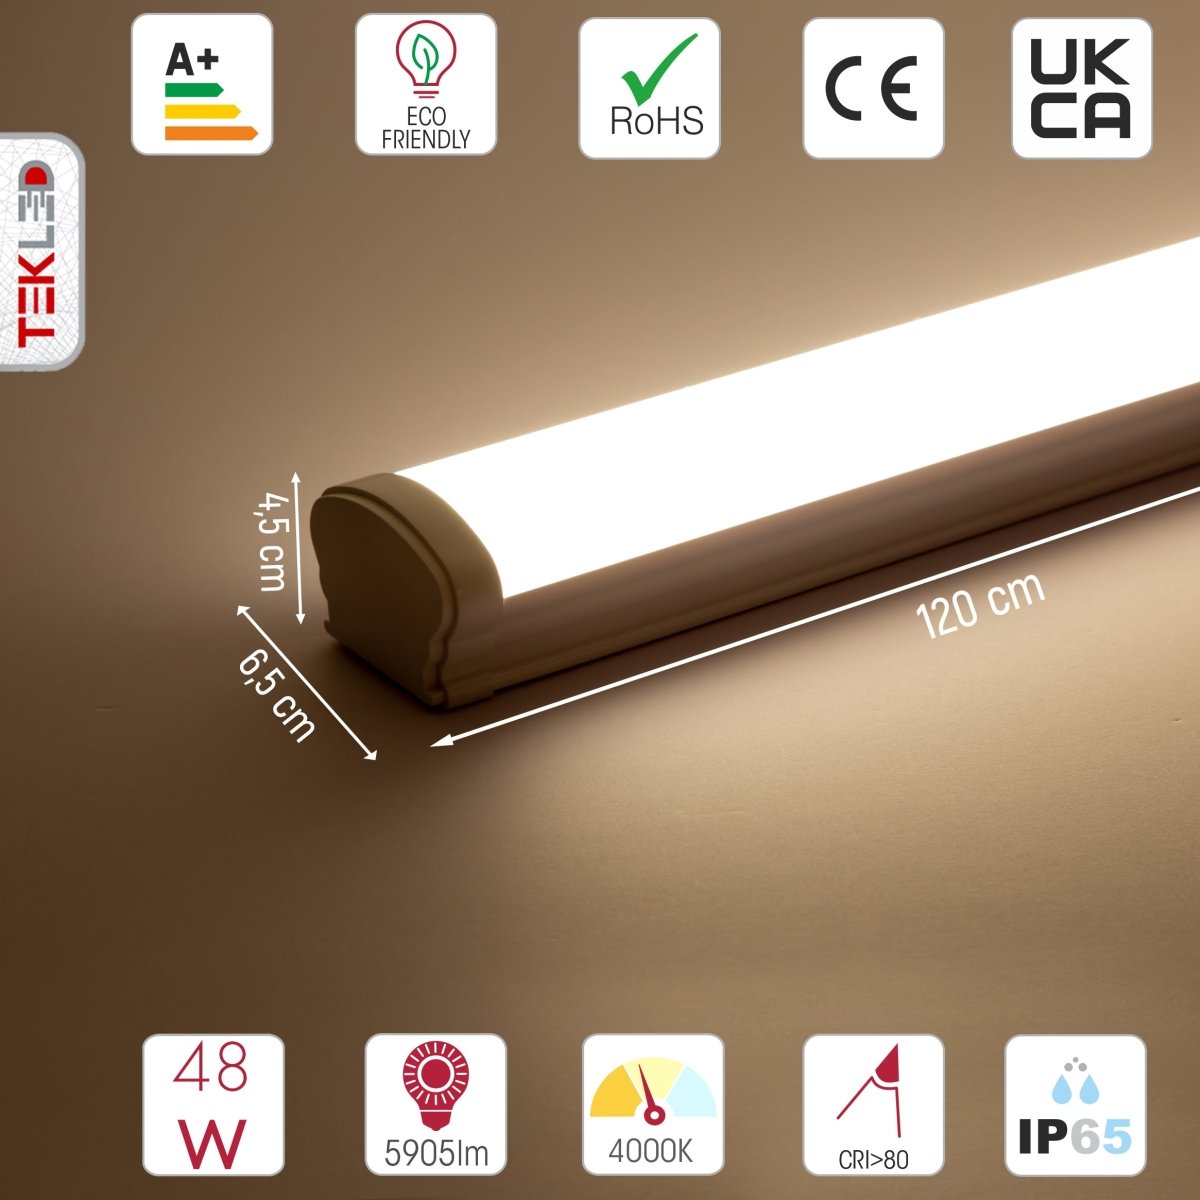 Technical specs and measurements for LED Tri-proof Batten Linear Fitting 48W 4000K Cool White IP65 120cm 4ft